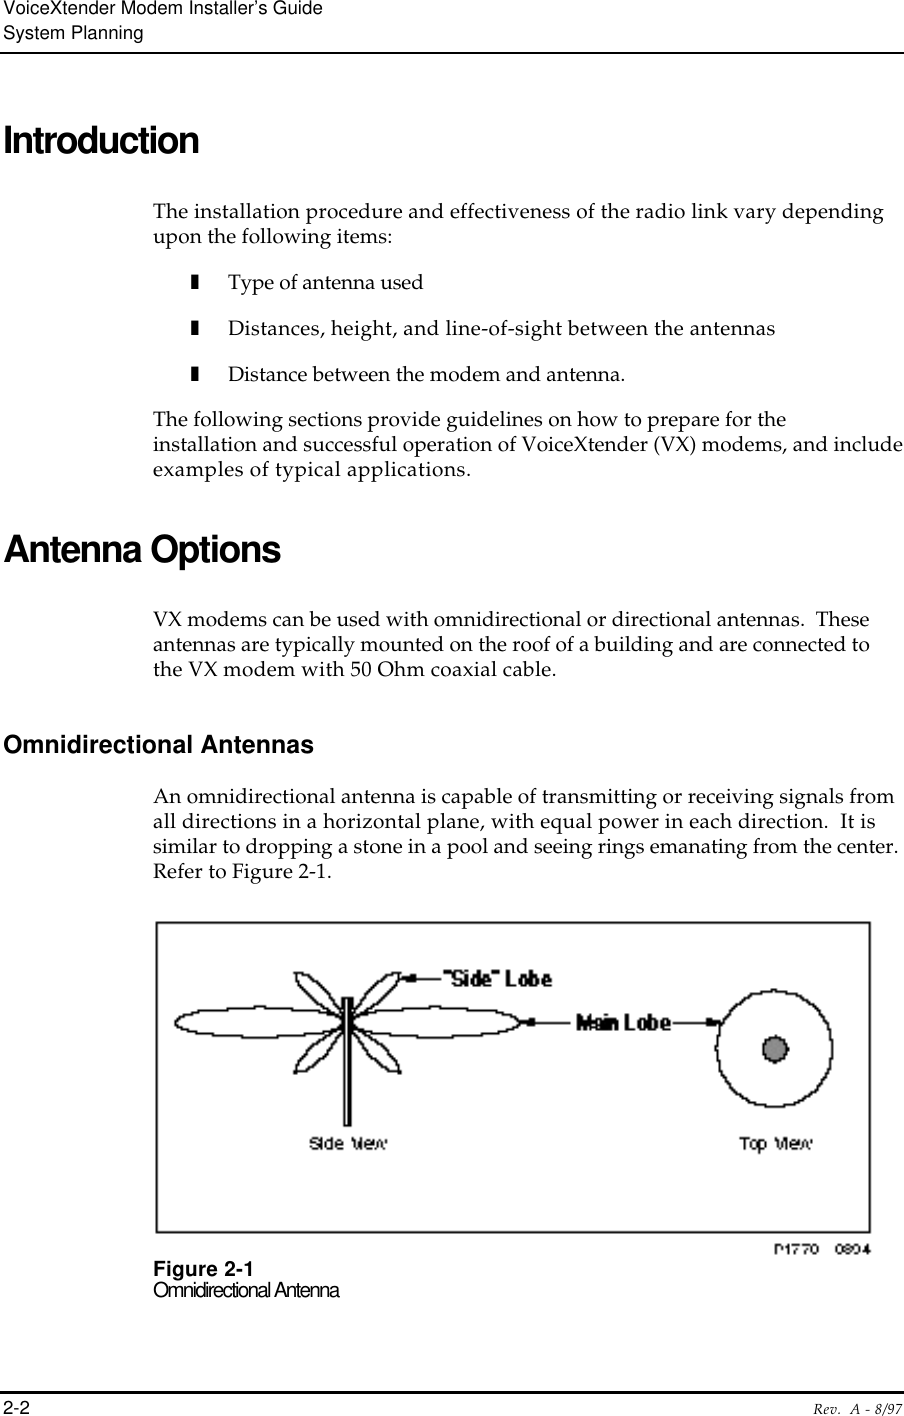 VoiceXtender Modem Installer’s GuideSystem Planning2-2 Rev.  A - 8/97IntroductionThe installation procedure and effectiveness of the radio link vary dependingupon the following items:❚Type of antenna used❚Distances, height, and line-of-sight between the antennas❚Distance between the modem and antenna.The following sections provide guidelines on how to prepare for theinstallation and successful operation of VoiceXtender (VX) modems, and includeexamples of typical applications.Antenna OptionsVX modems can be used with omnidirectional or directional antennas.  Theseantennas are typically mounted on the roof of a building and are connected tothe VX modem with 50 Ohm coaxial cable.Omnidirectional AntennasAn omnidirectional antenna is capable of transmitting or receiving signals fromall directions in a horizontal plane, with equal power in each direction.  It issimilar to dropping a stone in a pool and seeing rings emanating from the center.Refer to Figure 2-1.Figure 2-1Omnidirectional Antenna